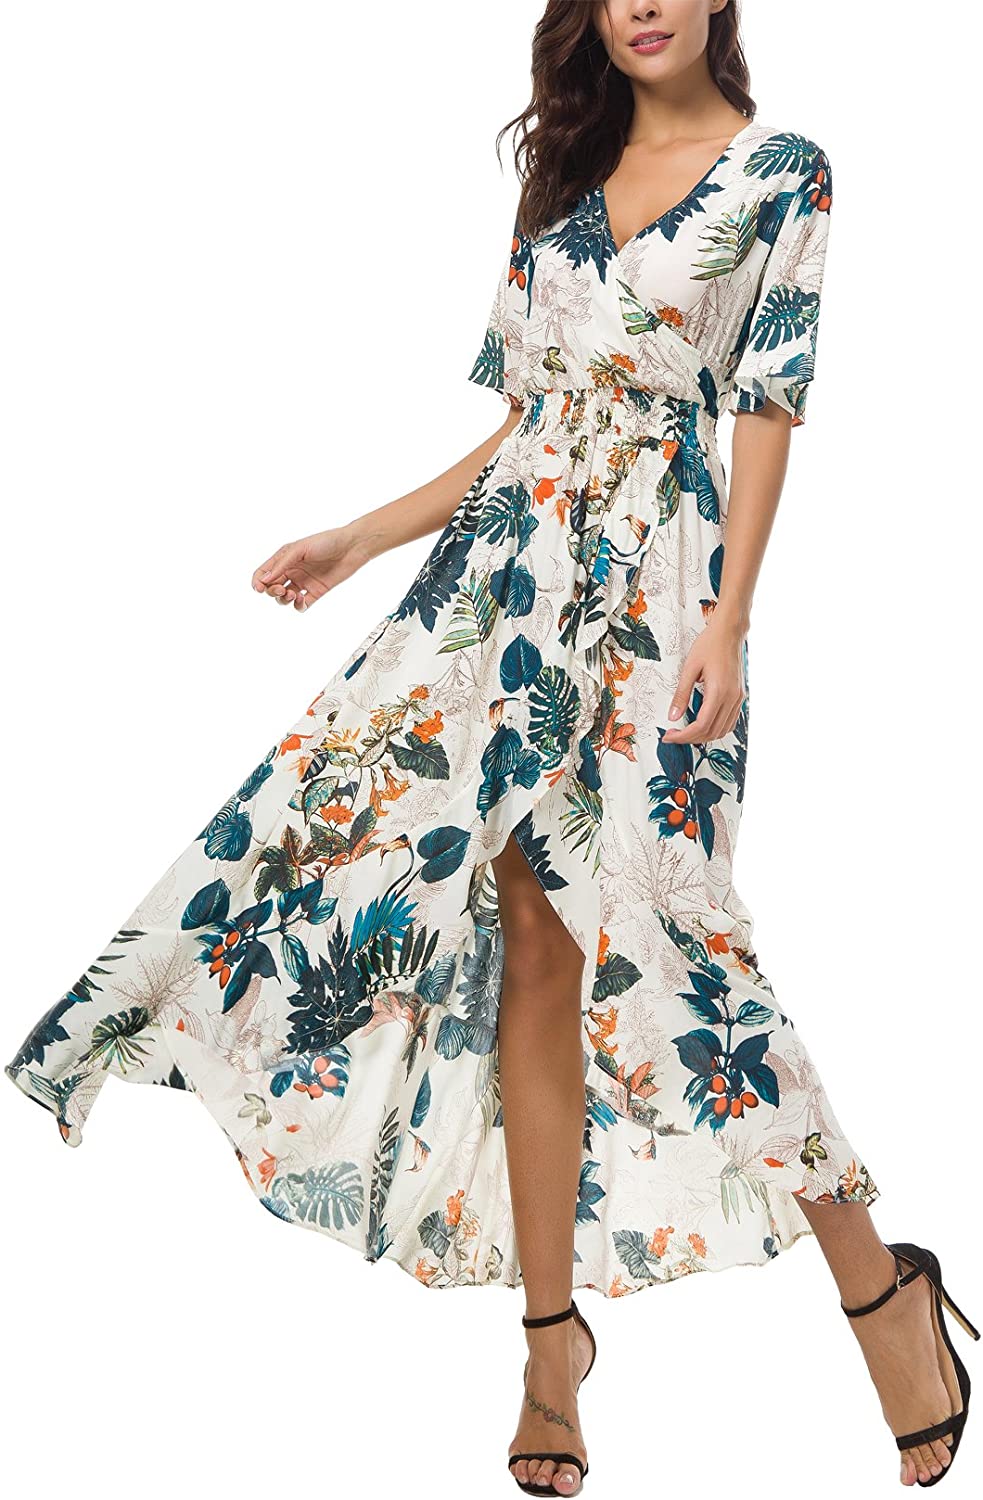 New Fashion Short Womens Print Dress For Tropical Parties